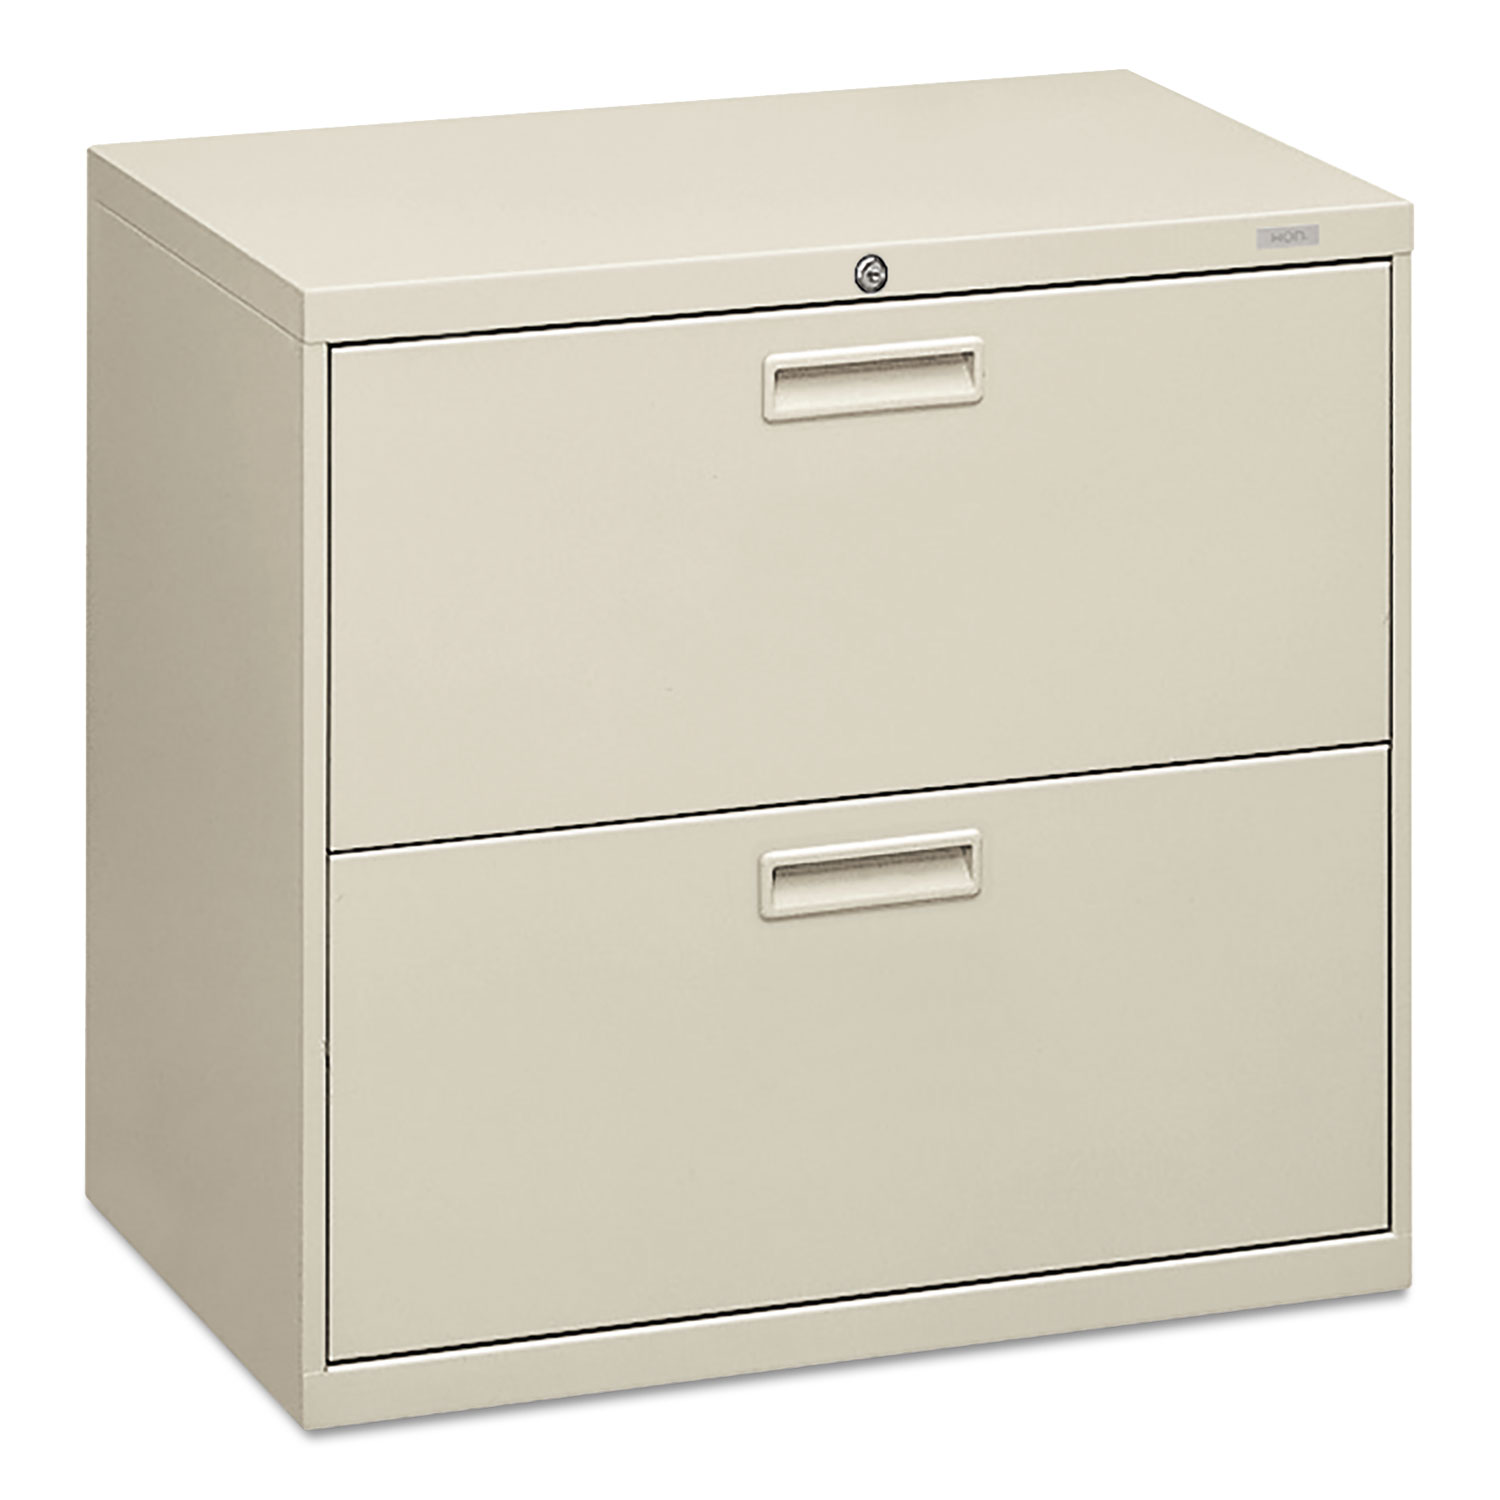 500 Series Two-Drawer Lateral File, 30w x 19-1/4d x 28-3/8h, Light Gray